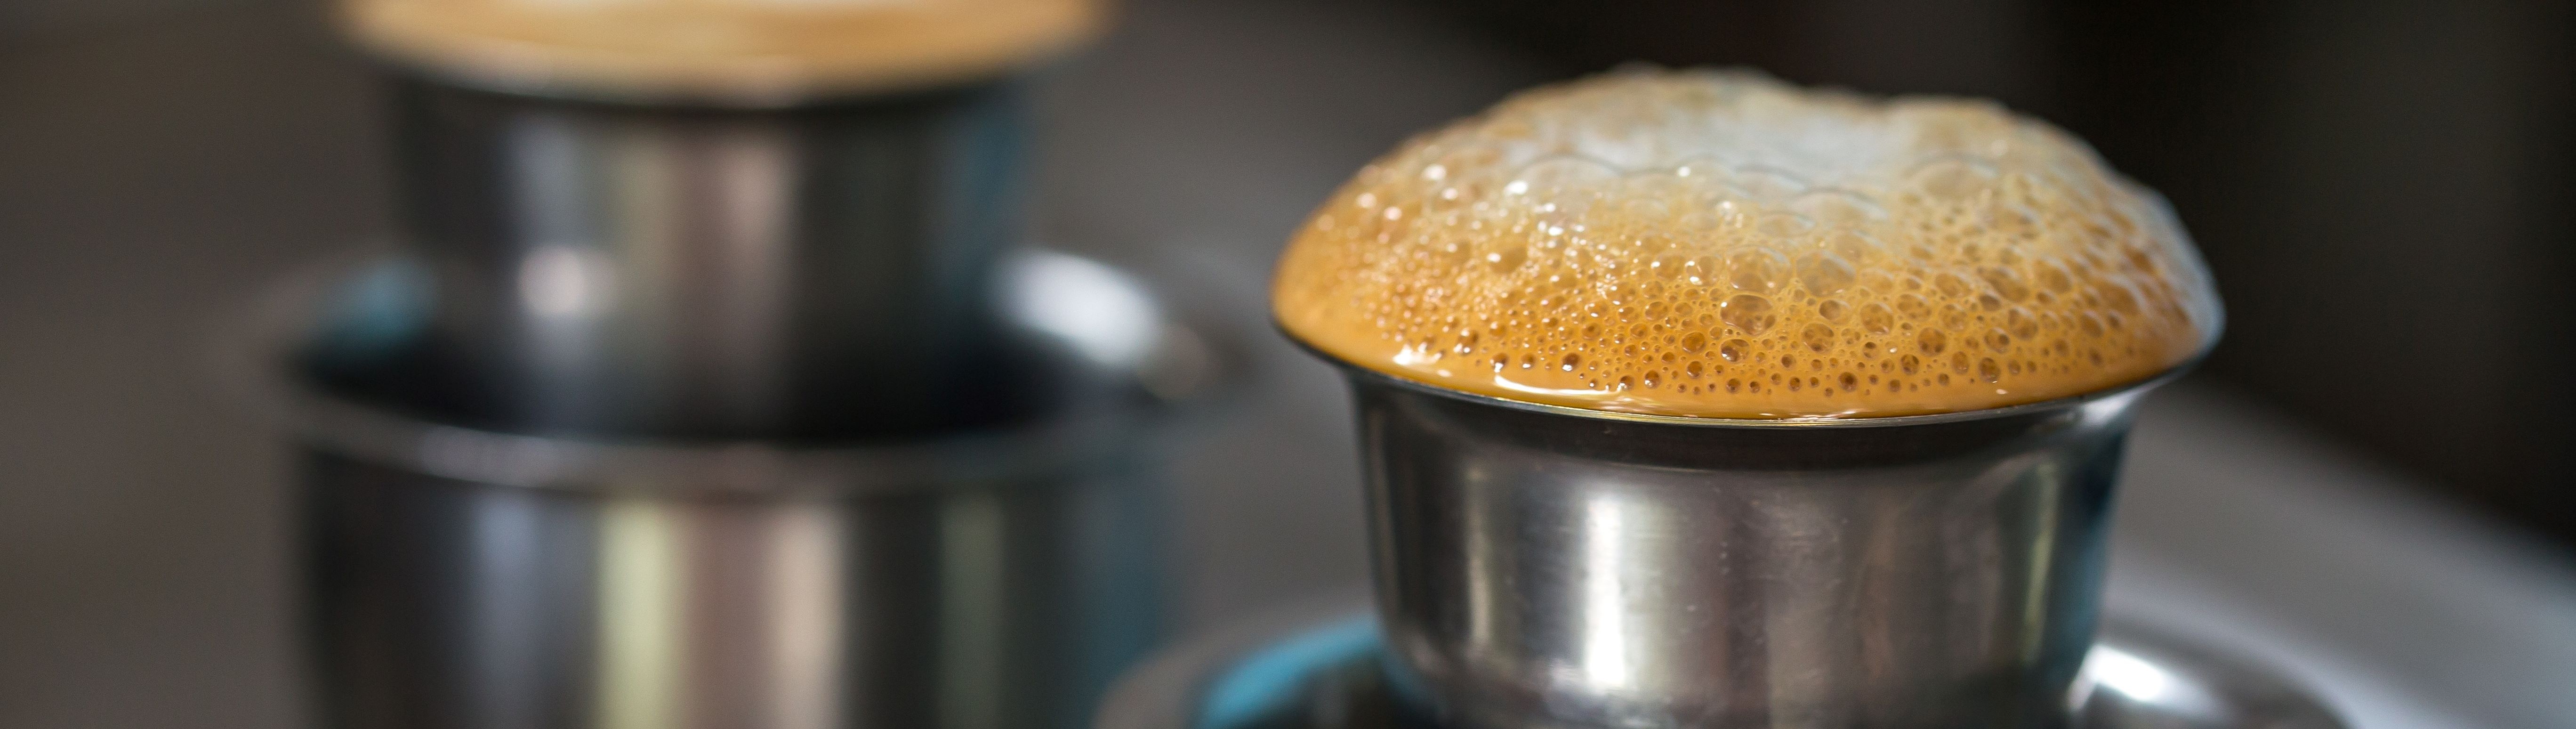 SOUTH INDIAN FILTER COFFEE - Essence of Life - Food